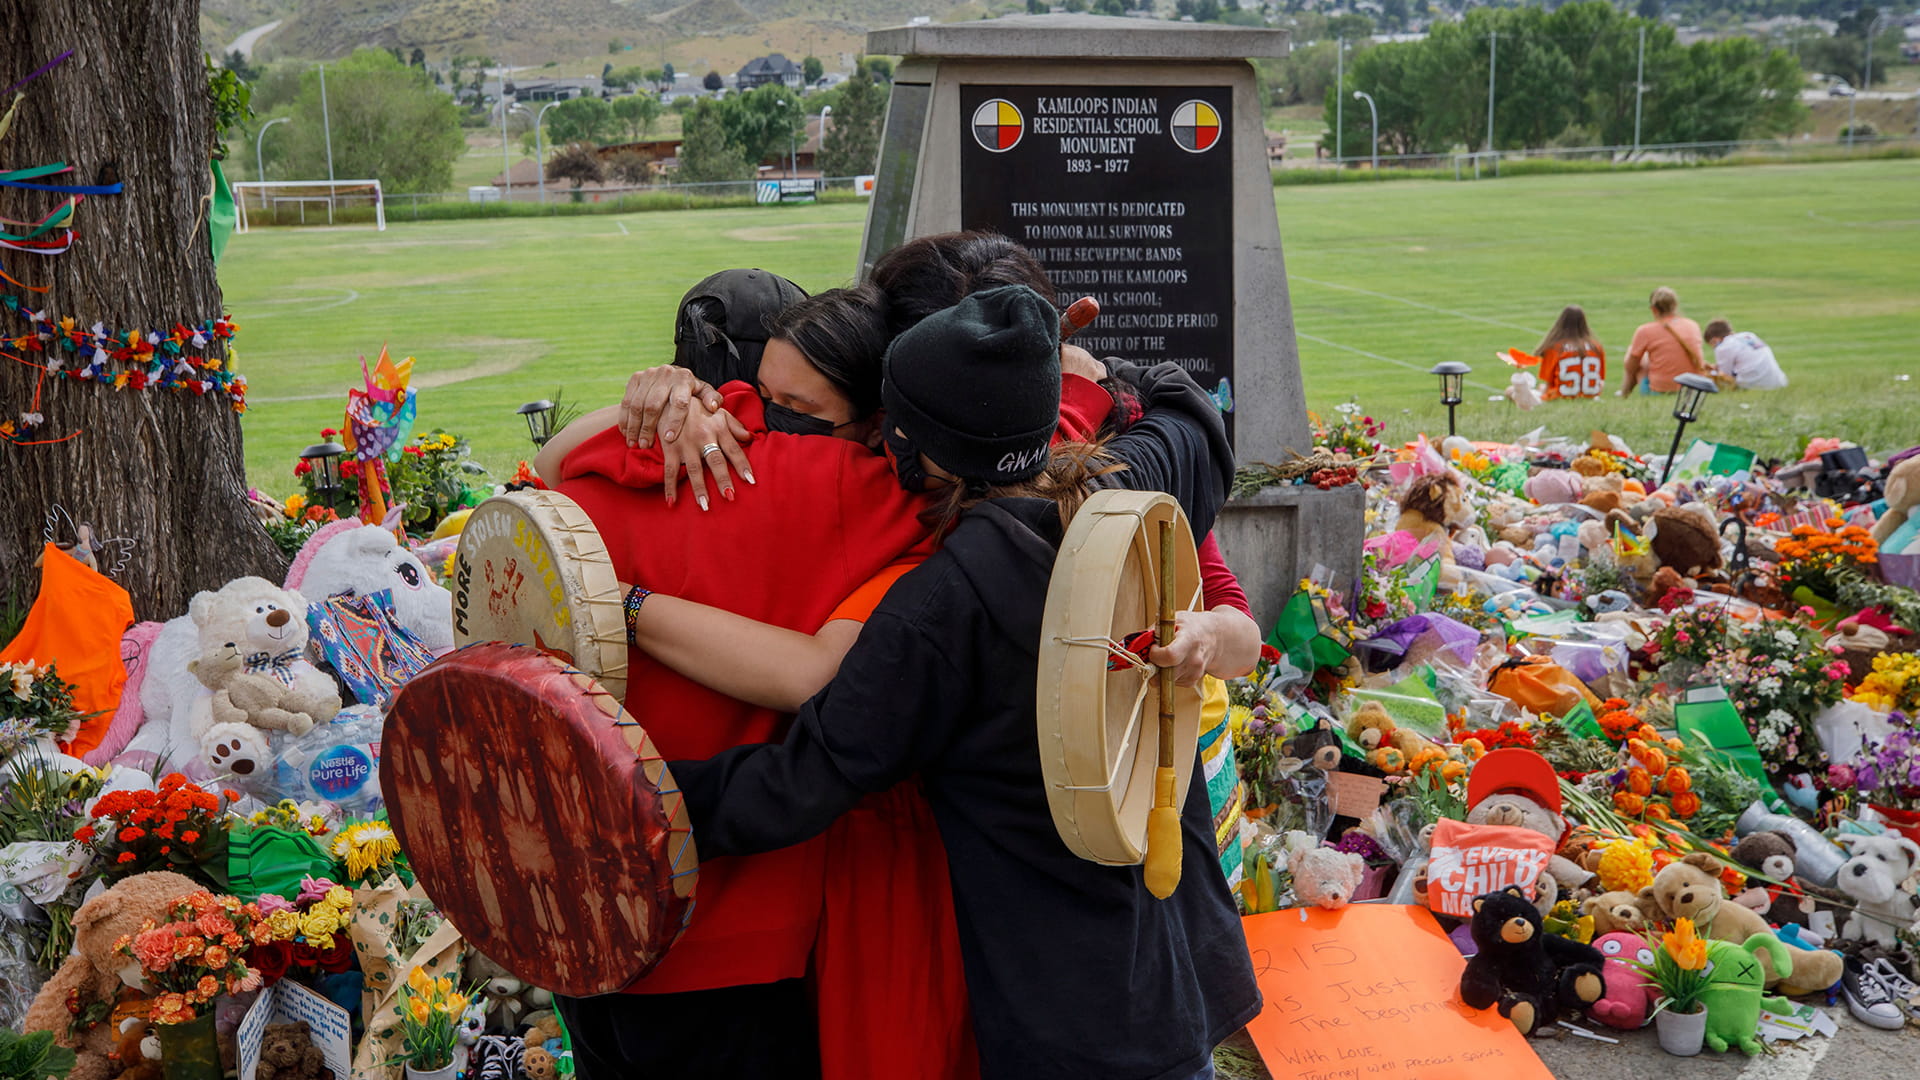 Group of people hugging one another at Native American Boarding School memorial